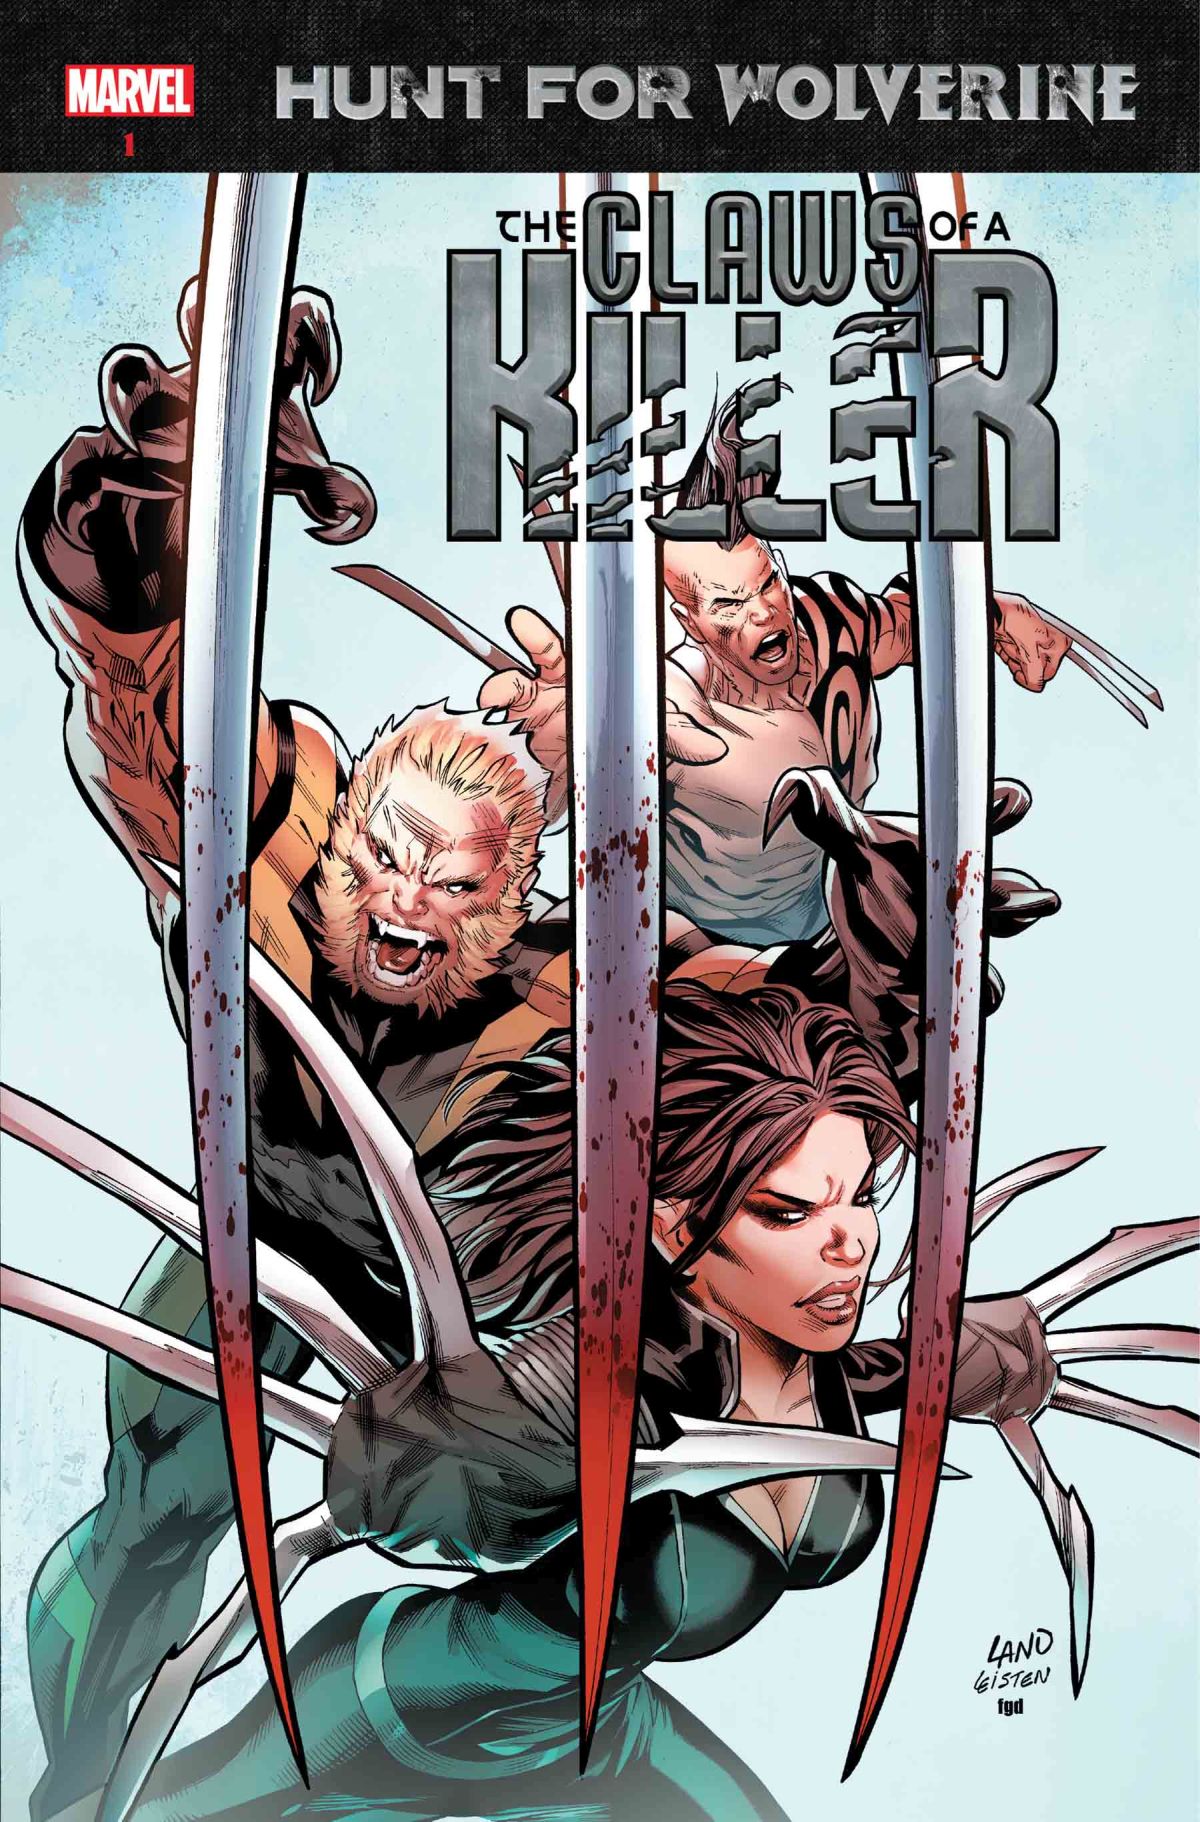 HUNT FOR WOLVERINE: CLAWS OF A KILLER #1 (of 4)